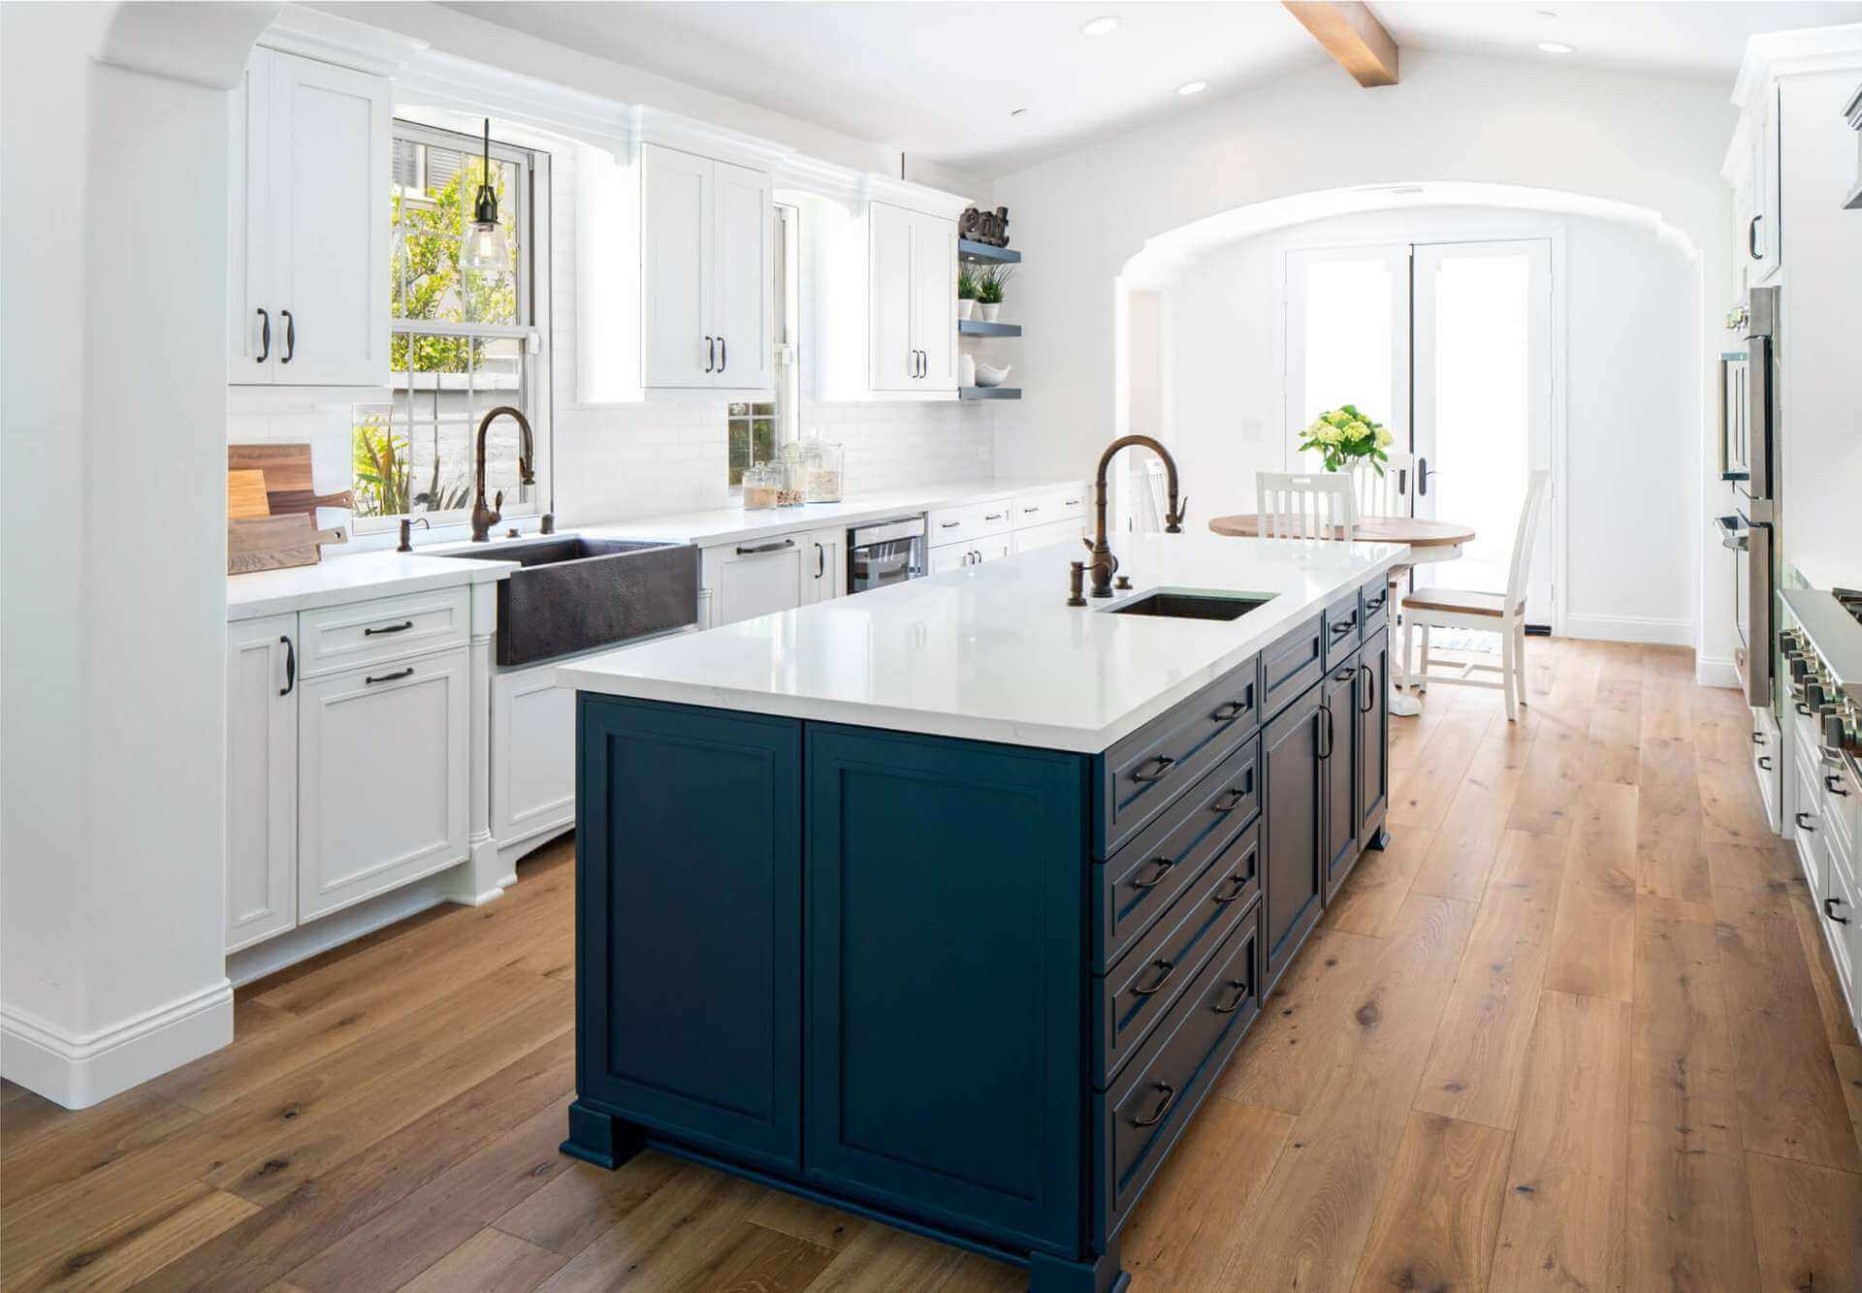 10 Popular Kitchen Cabinet Trends For 10  Sea Pointe - what is the latest trend in kitchen cabinets?